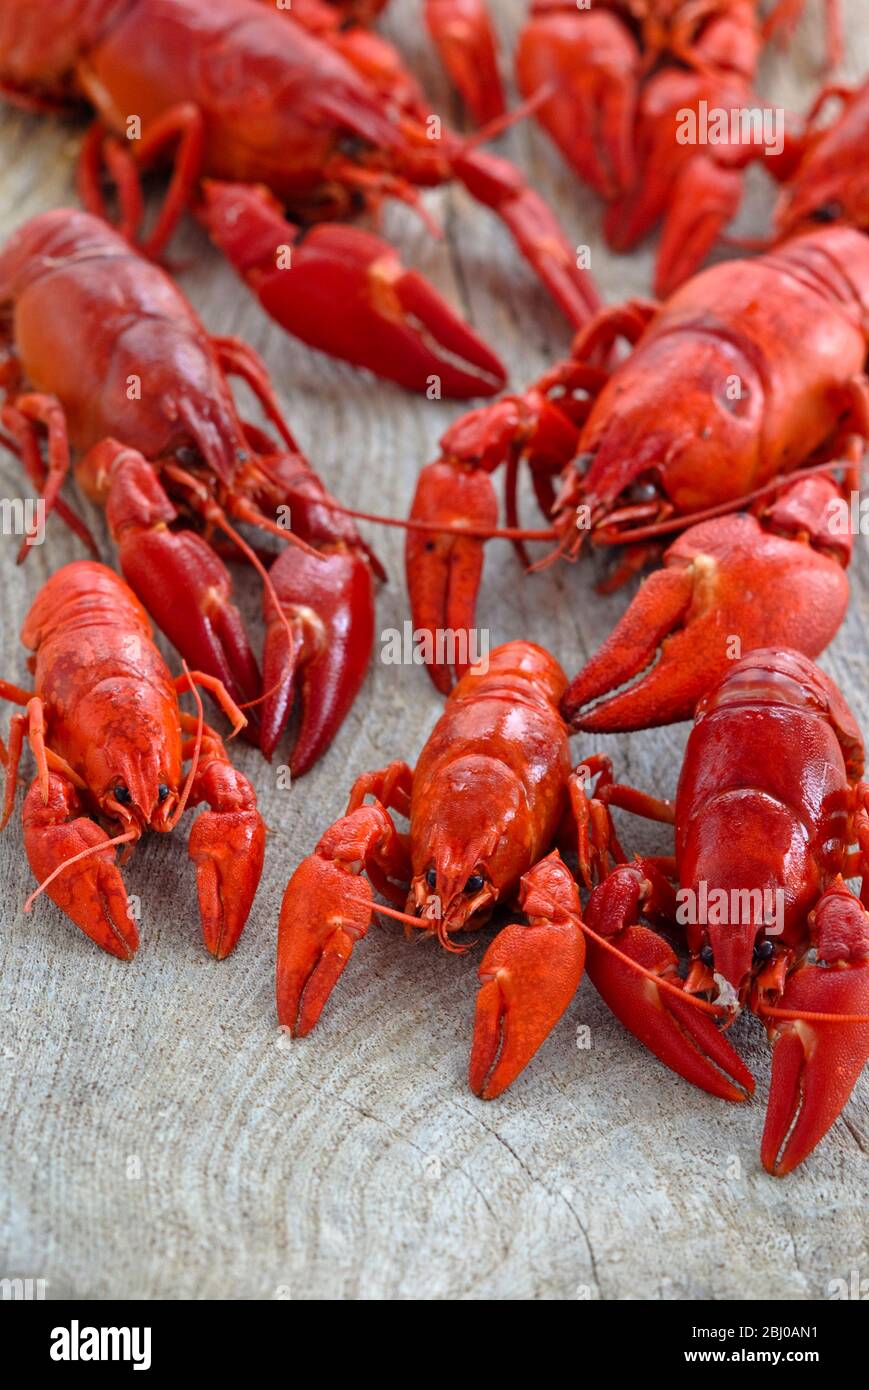 Fresh boiled red crayfish on wooden board - Stock Photo